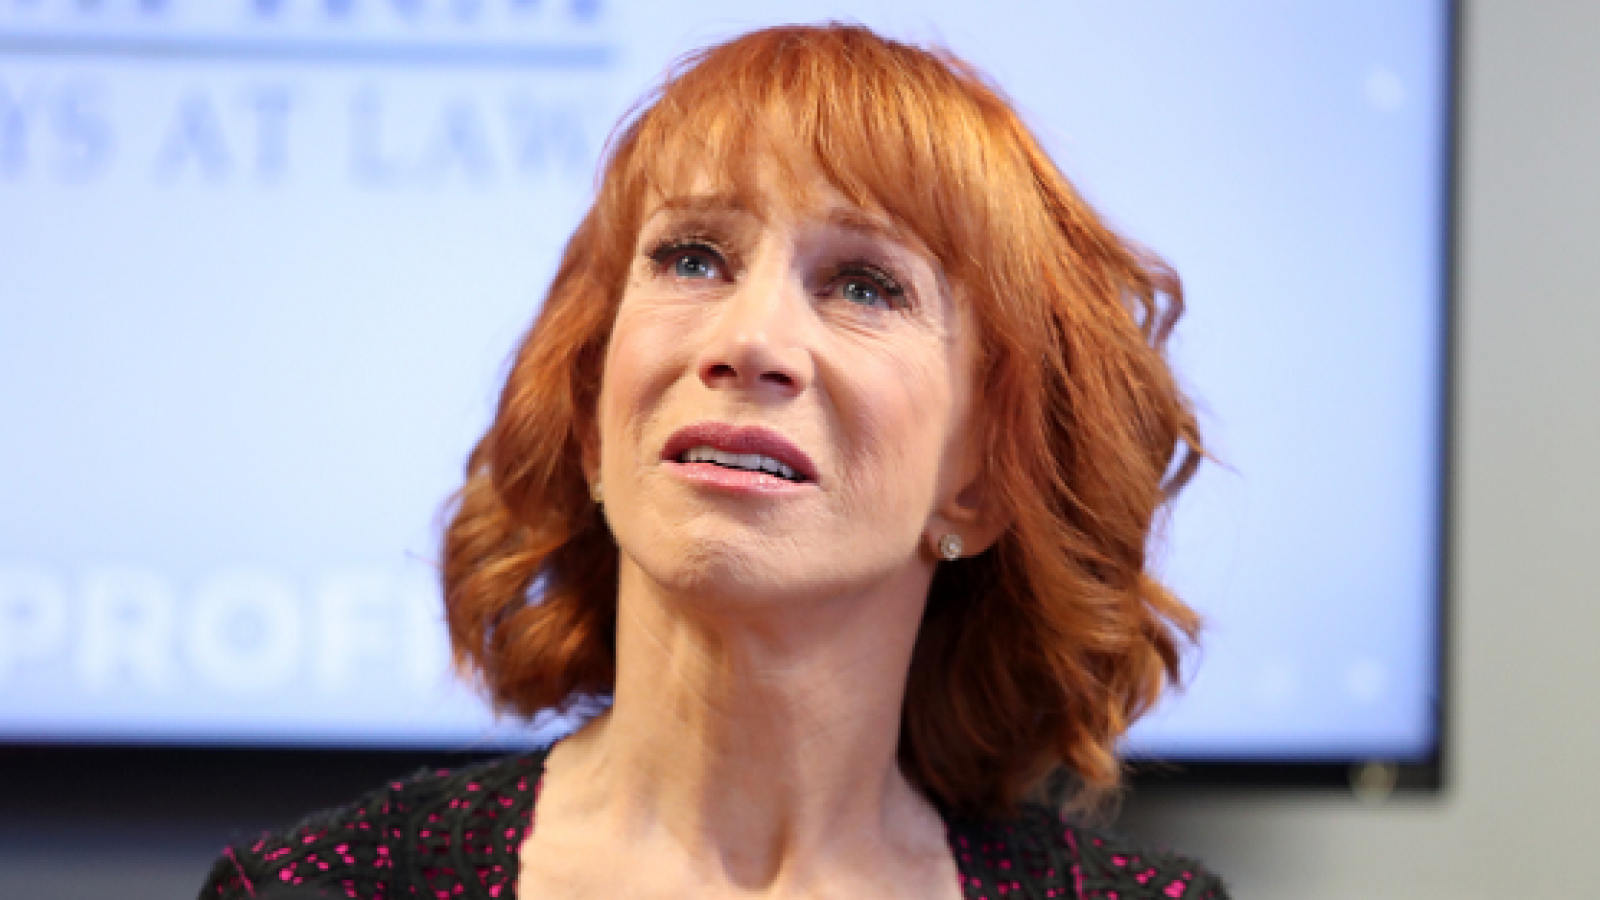 Kathy Griffin Blows the Whistle on Pedo Brother and Slams Ashton Kutcher and Mila Kunis Over Danny Masterson Support